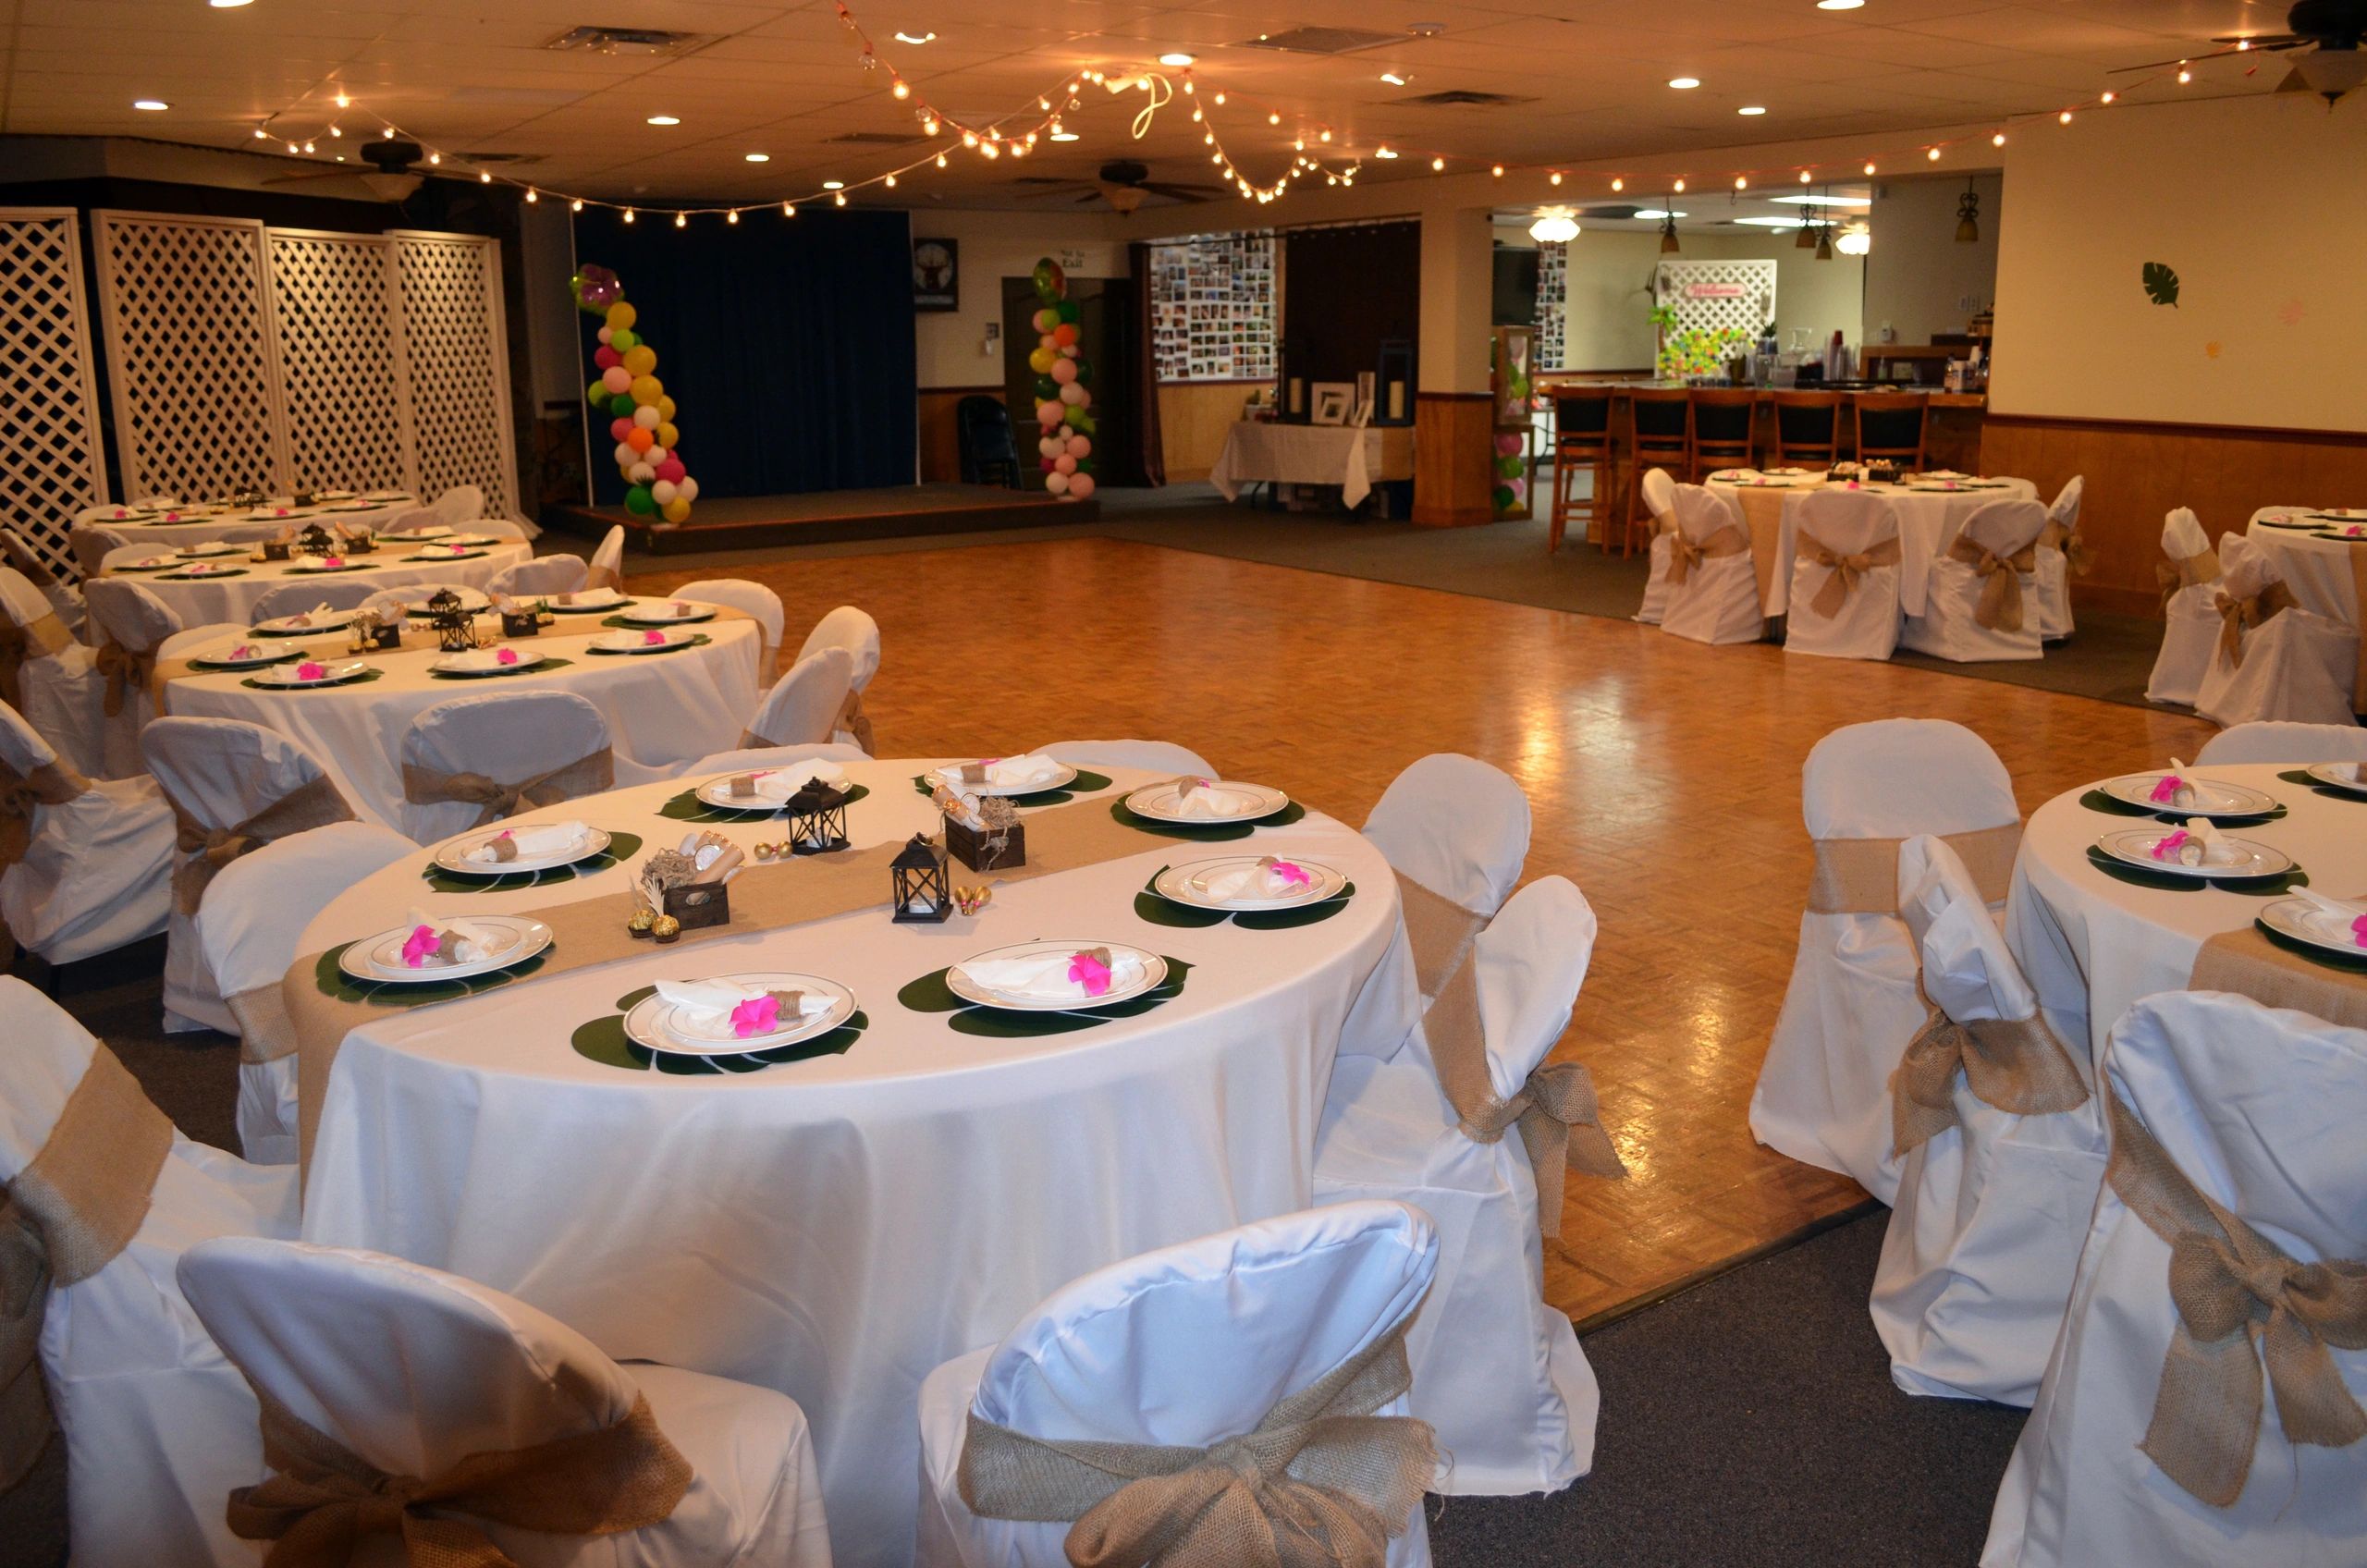 A photo taken in the Lodge Room showing wonderful table decorations set up by a renter.